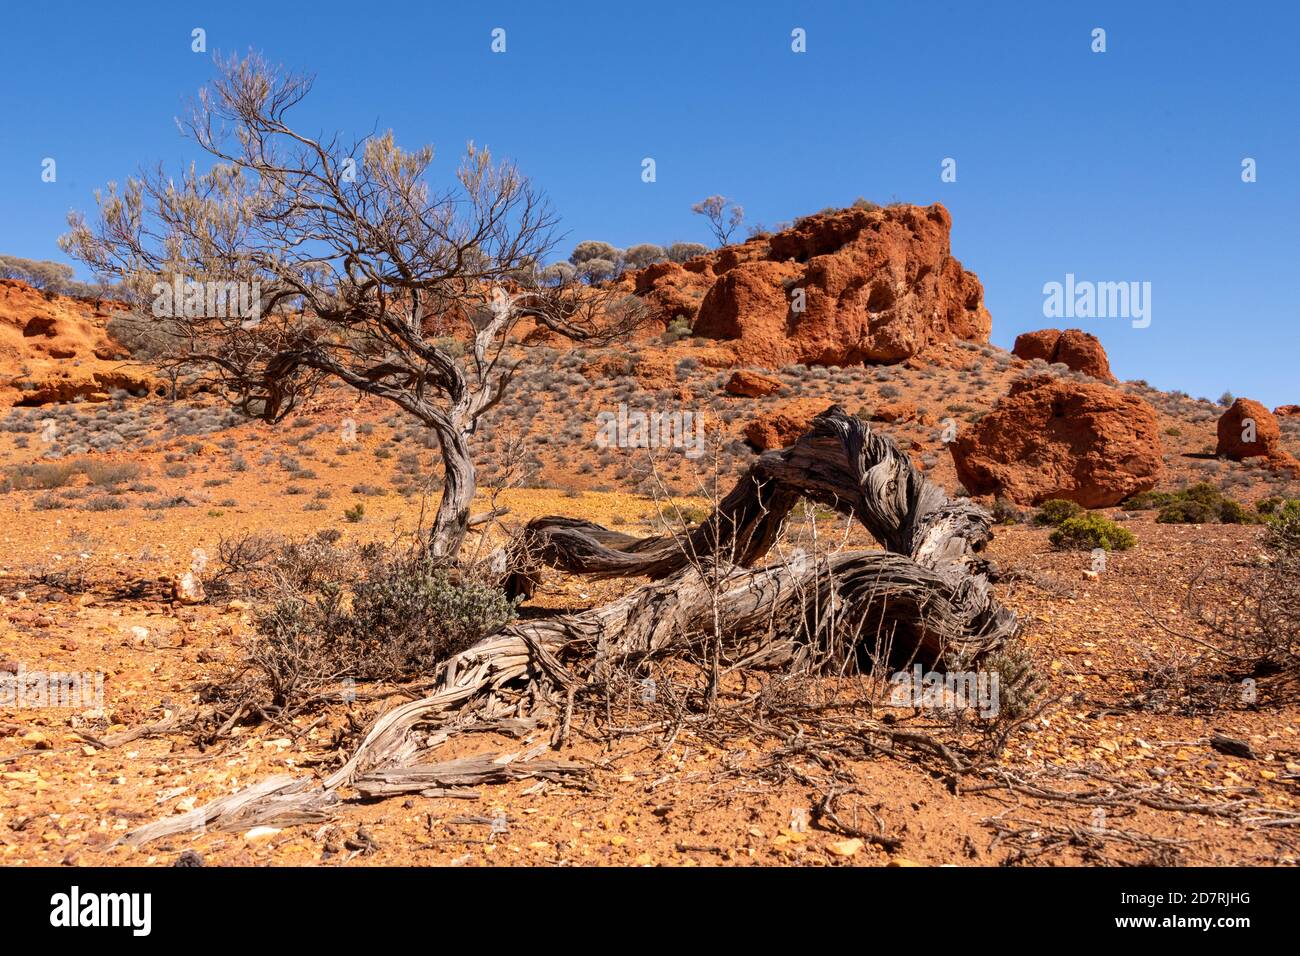 Extreme outback conditions results in 'breakaway' country and stunted vegetation. Stock Photo